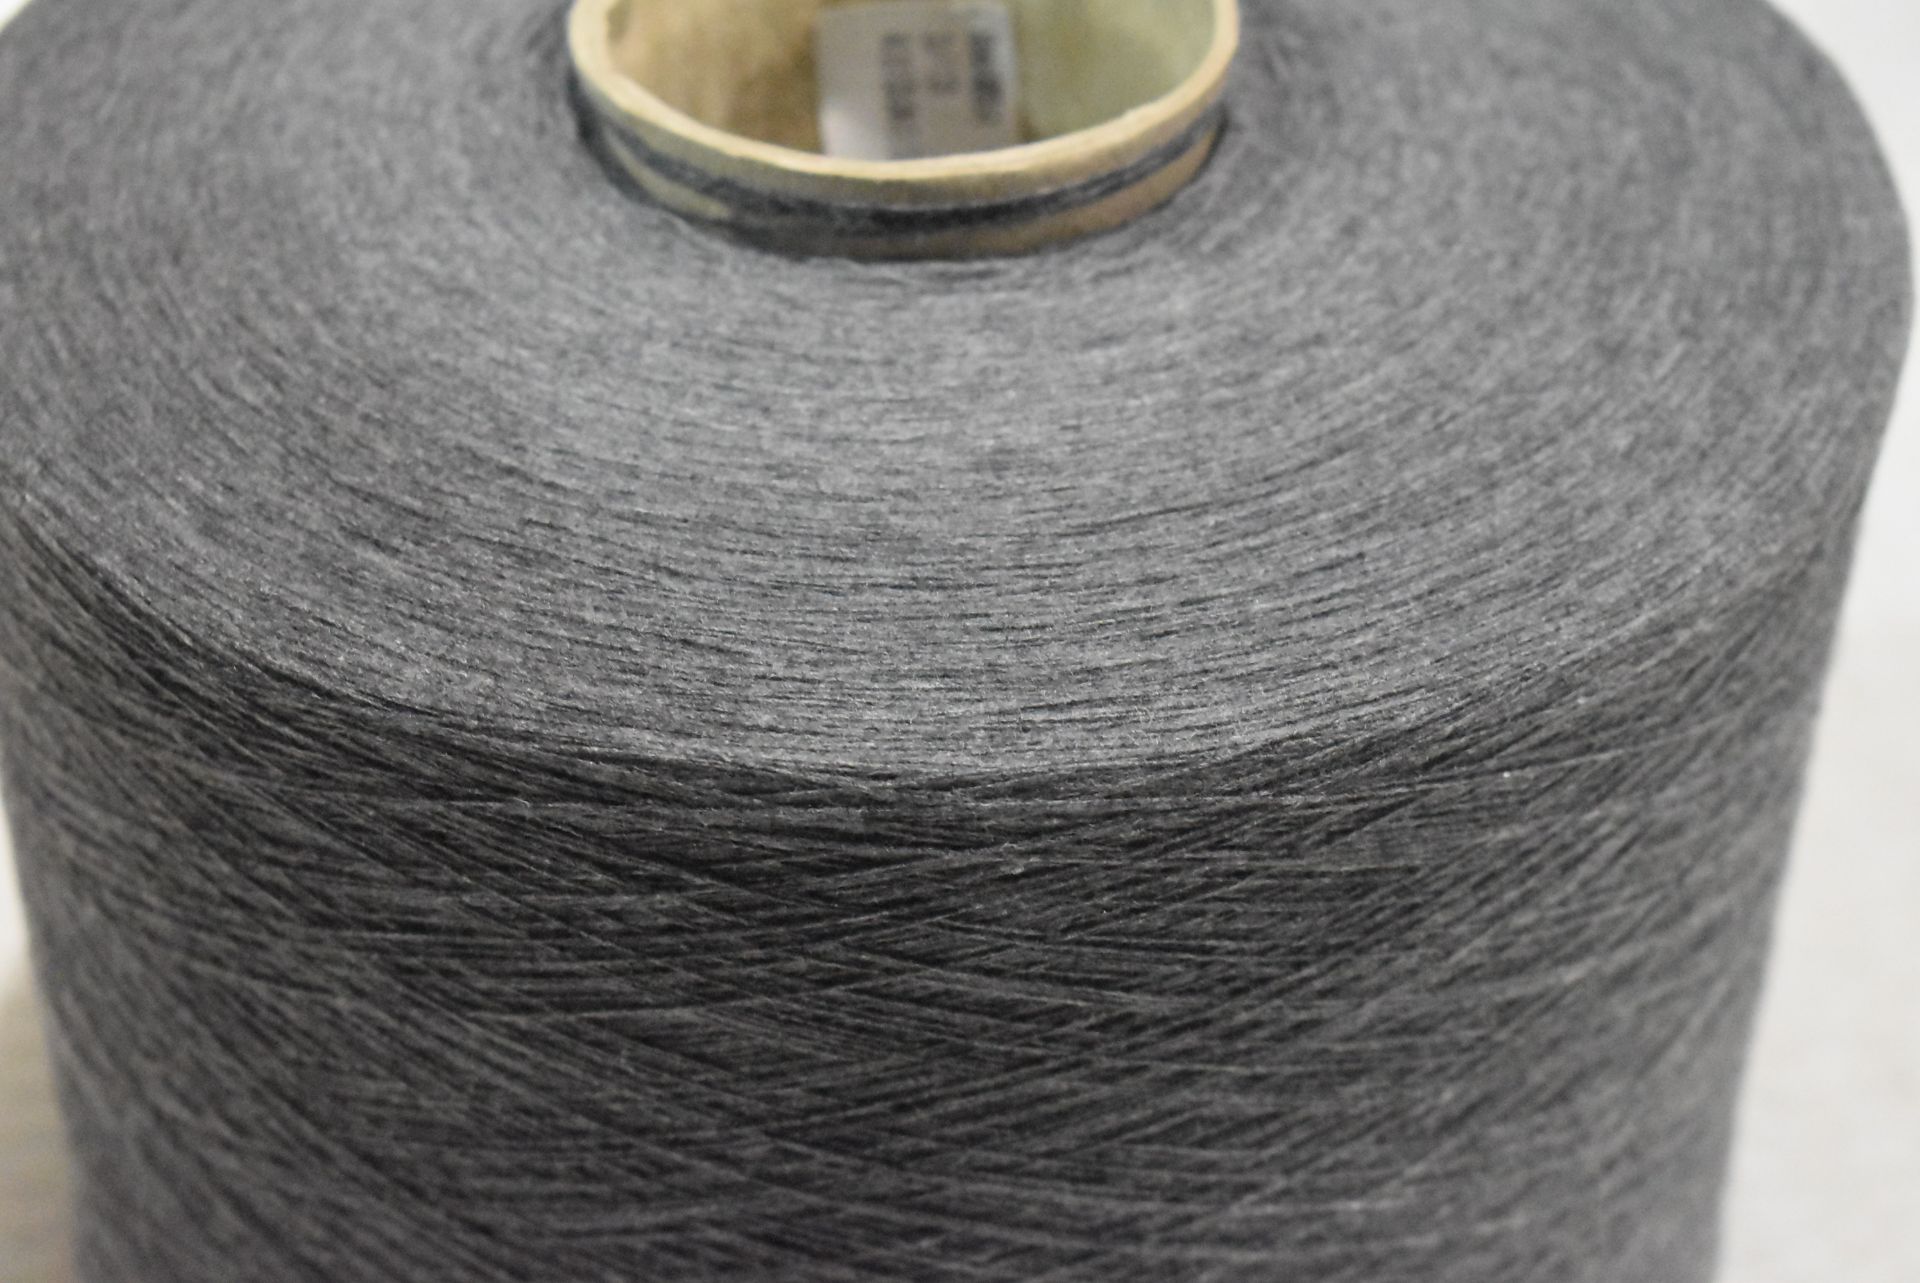 4 x Cones of 1/13 MicroCotton Knitting Yarn - Mid Grey - Approx Weight: 2,500g - New Stock ABL Yarn - Image 6 of 17